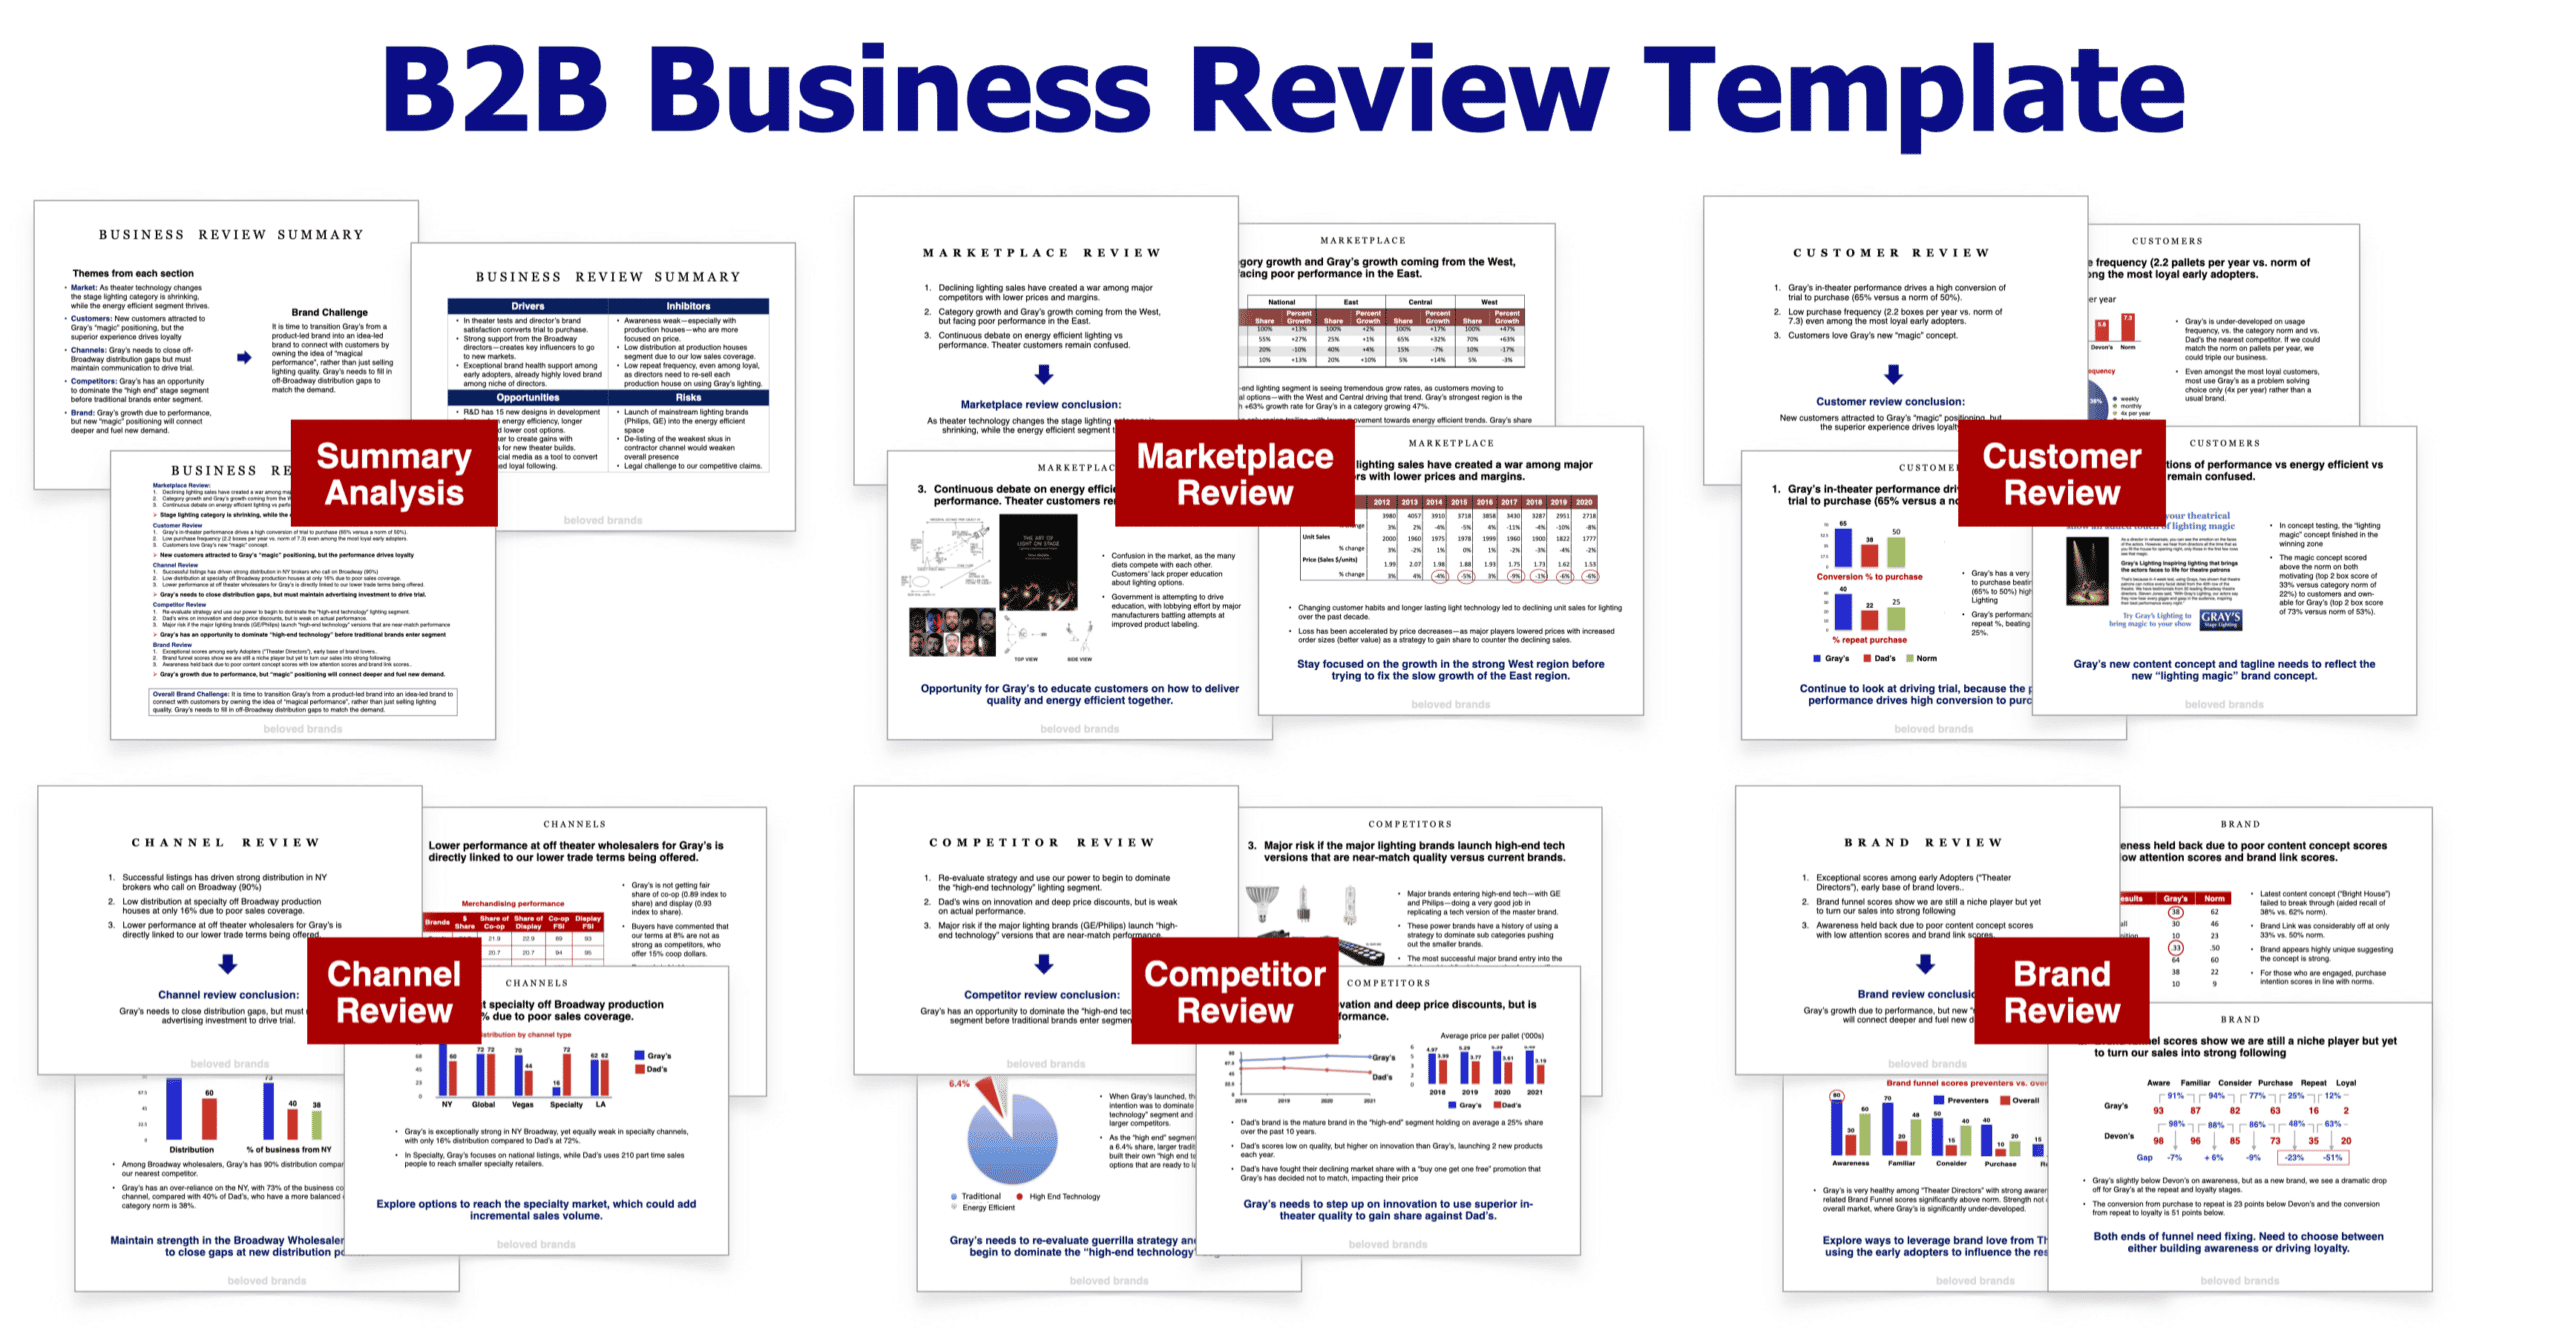 B2B Business Review Template